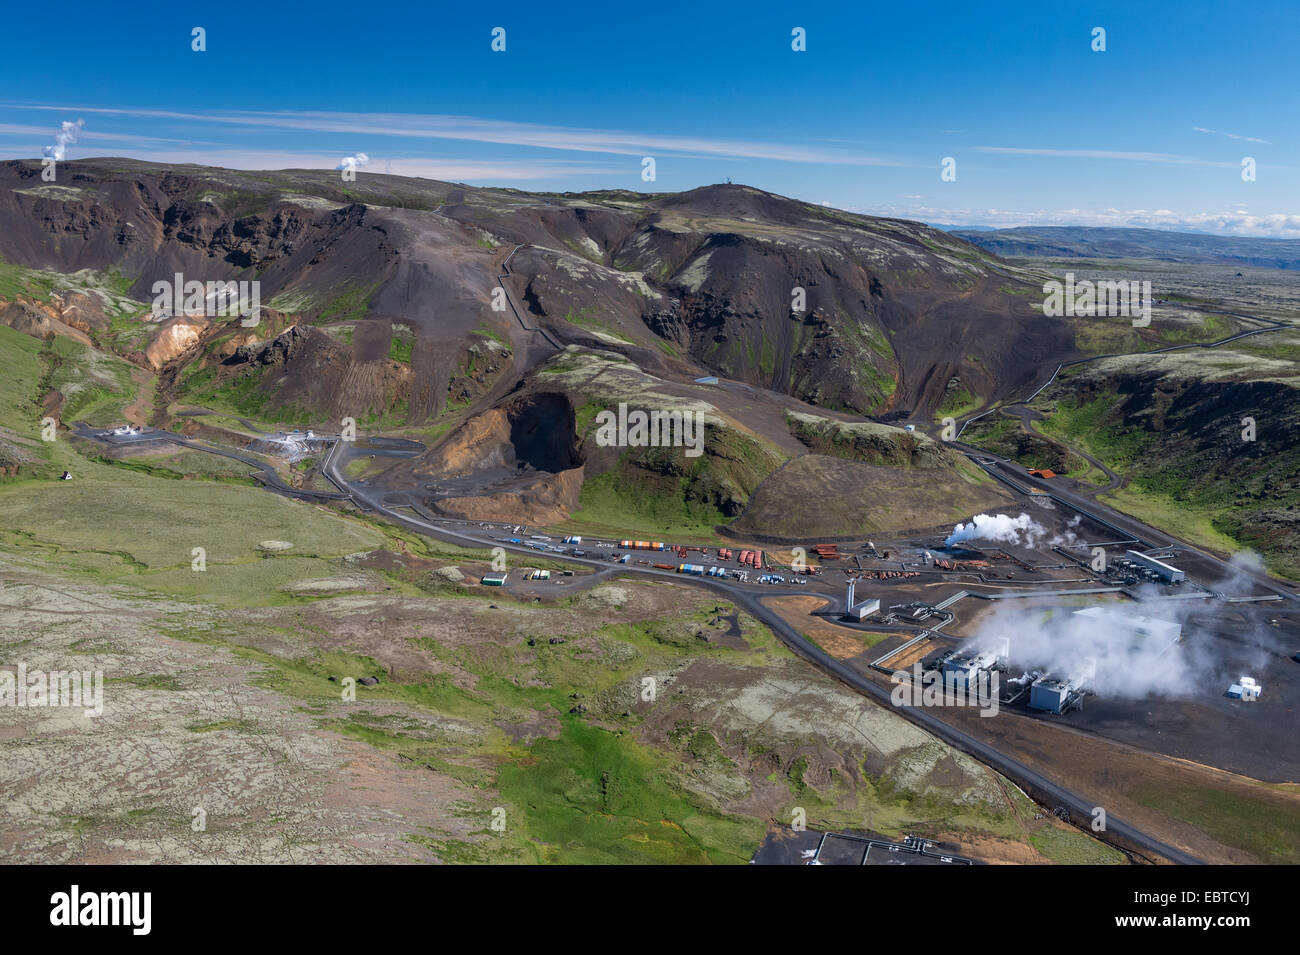 Aerial View of Geysers and Hot Springs near Reykjavik, Iceland Stock Photo